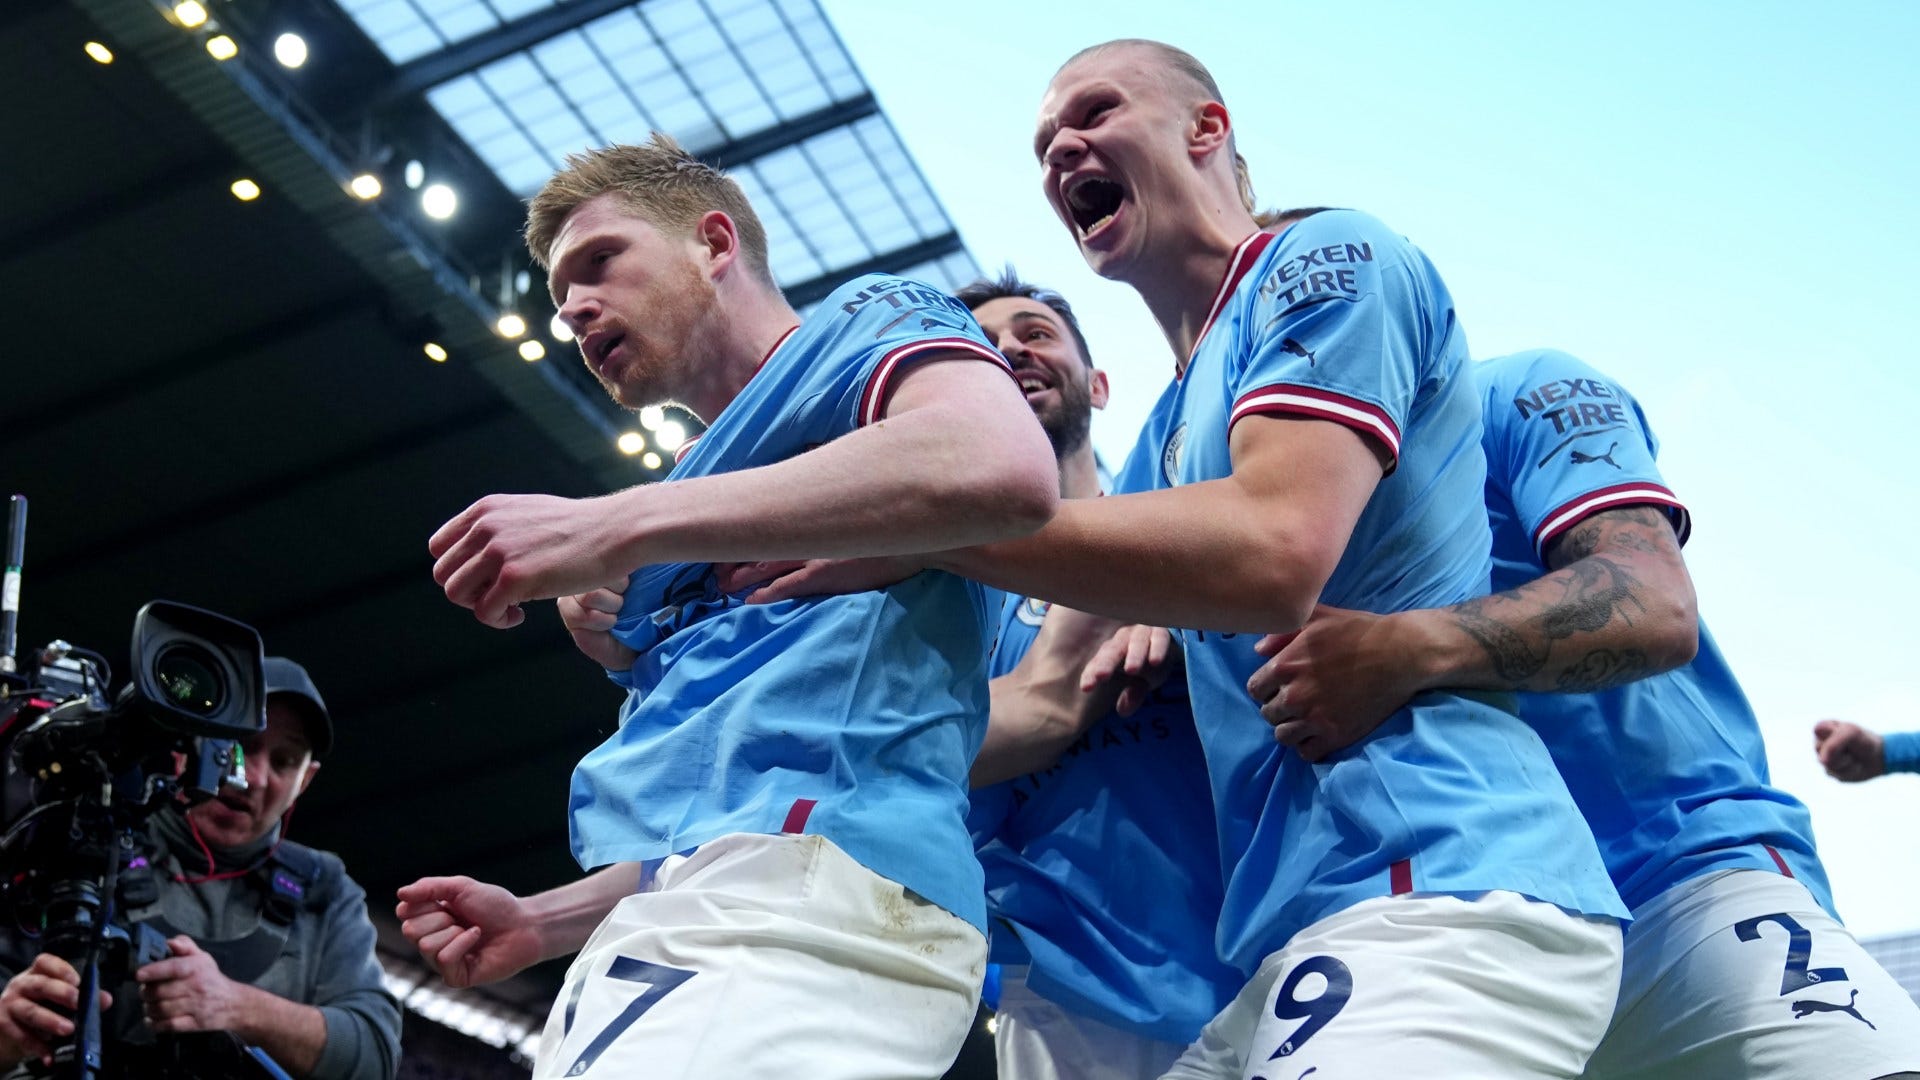 Fulham vs Manchester City Where to watch the match online, live stream, TV channels and kick-off time Goal US